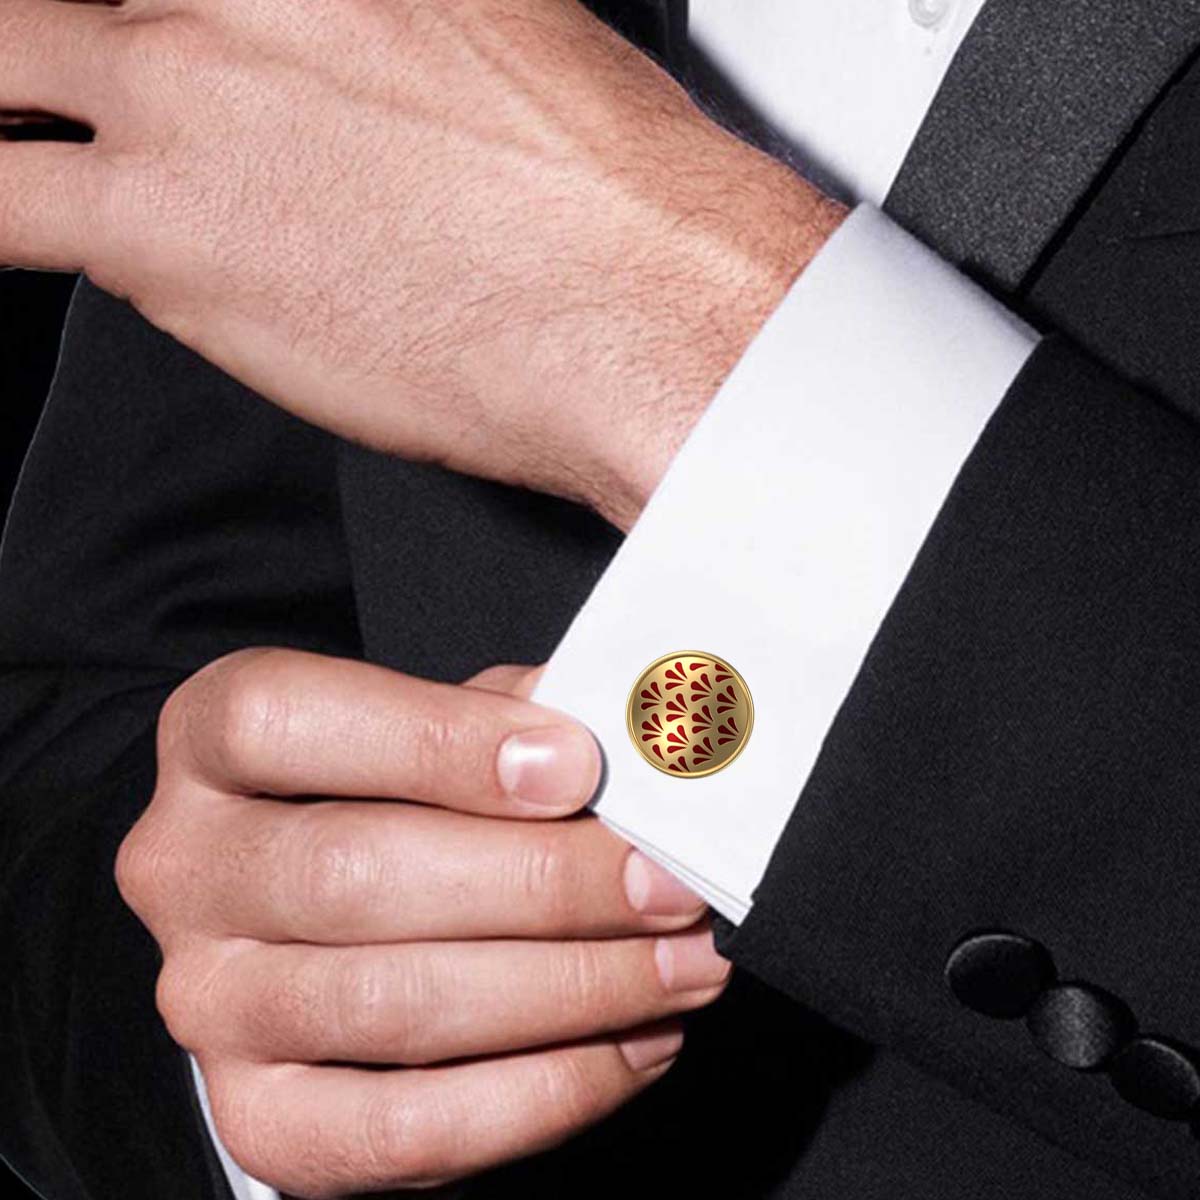 Bloom, Classic Cufflink Set with 18kt Gold Plating and Enamel  on Brass.